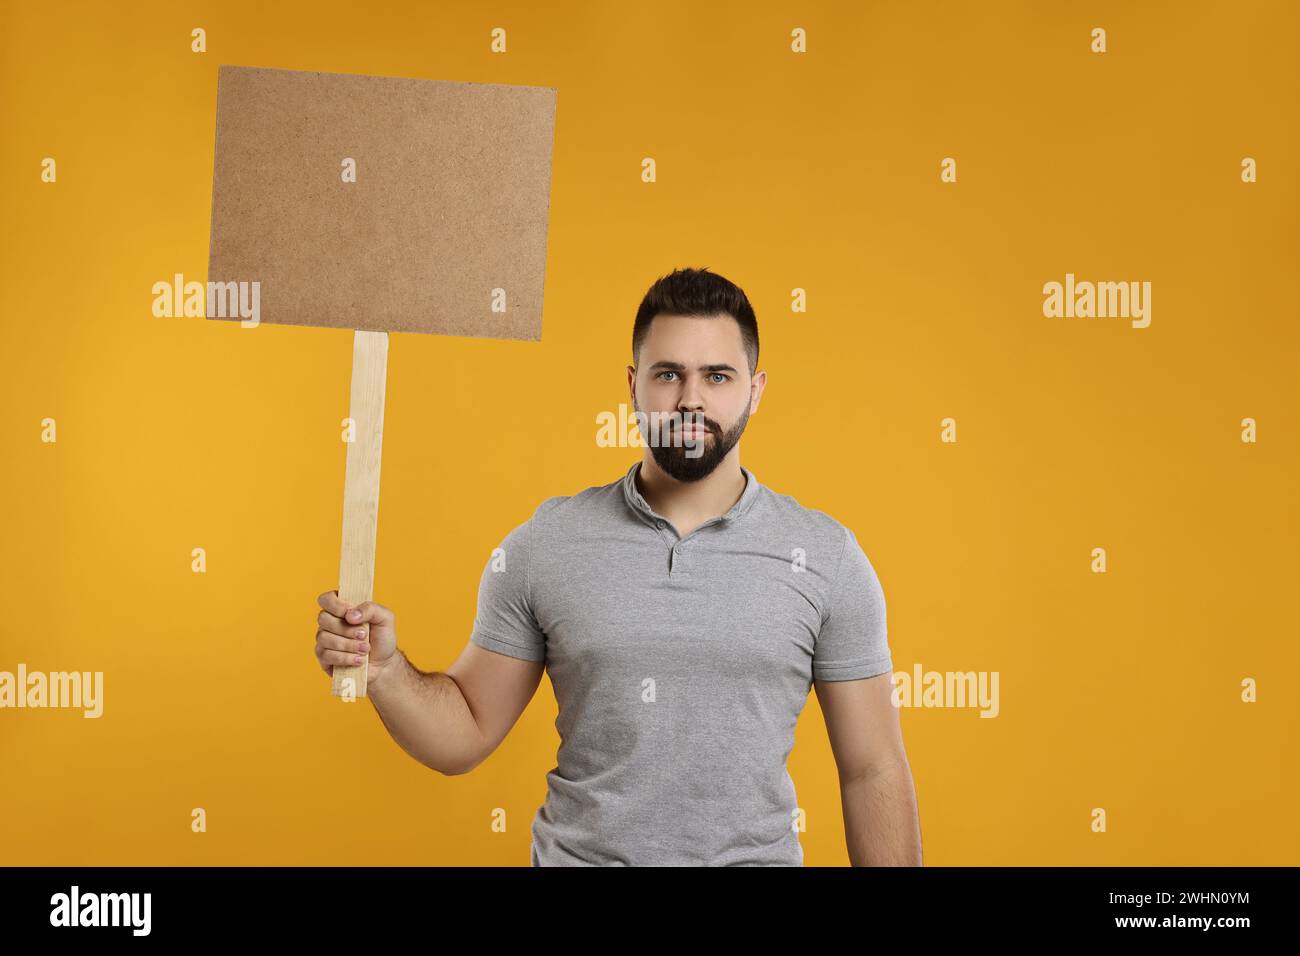 Upset man holding blank sign on orange background, space for text Stock Photo